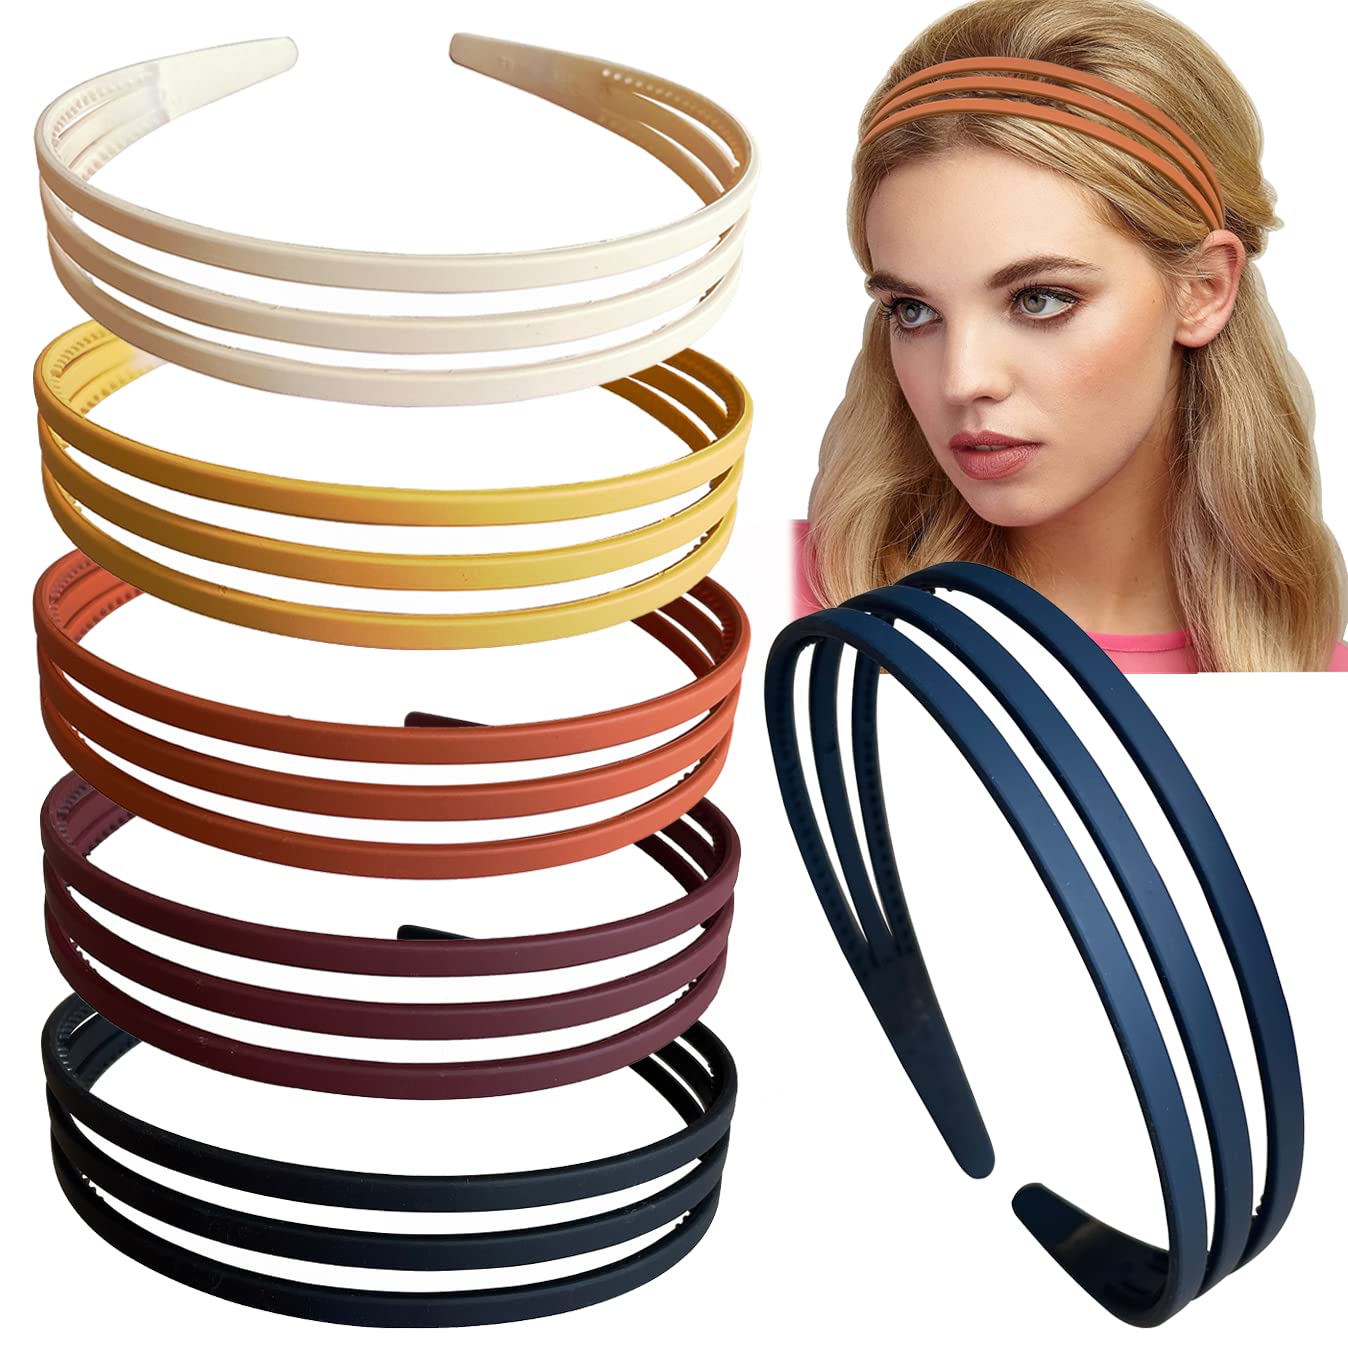 Set of 6 Thin Plastic Headbands for Girls Women with Small Head